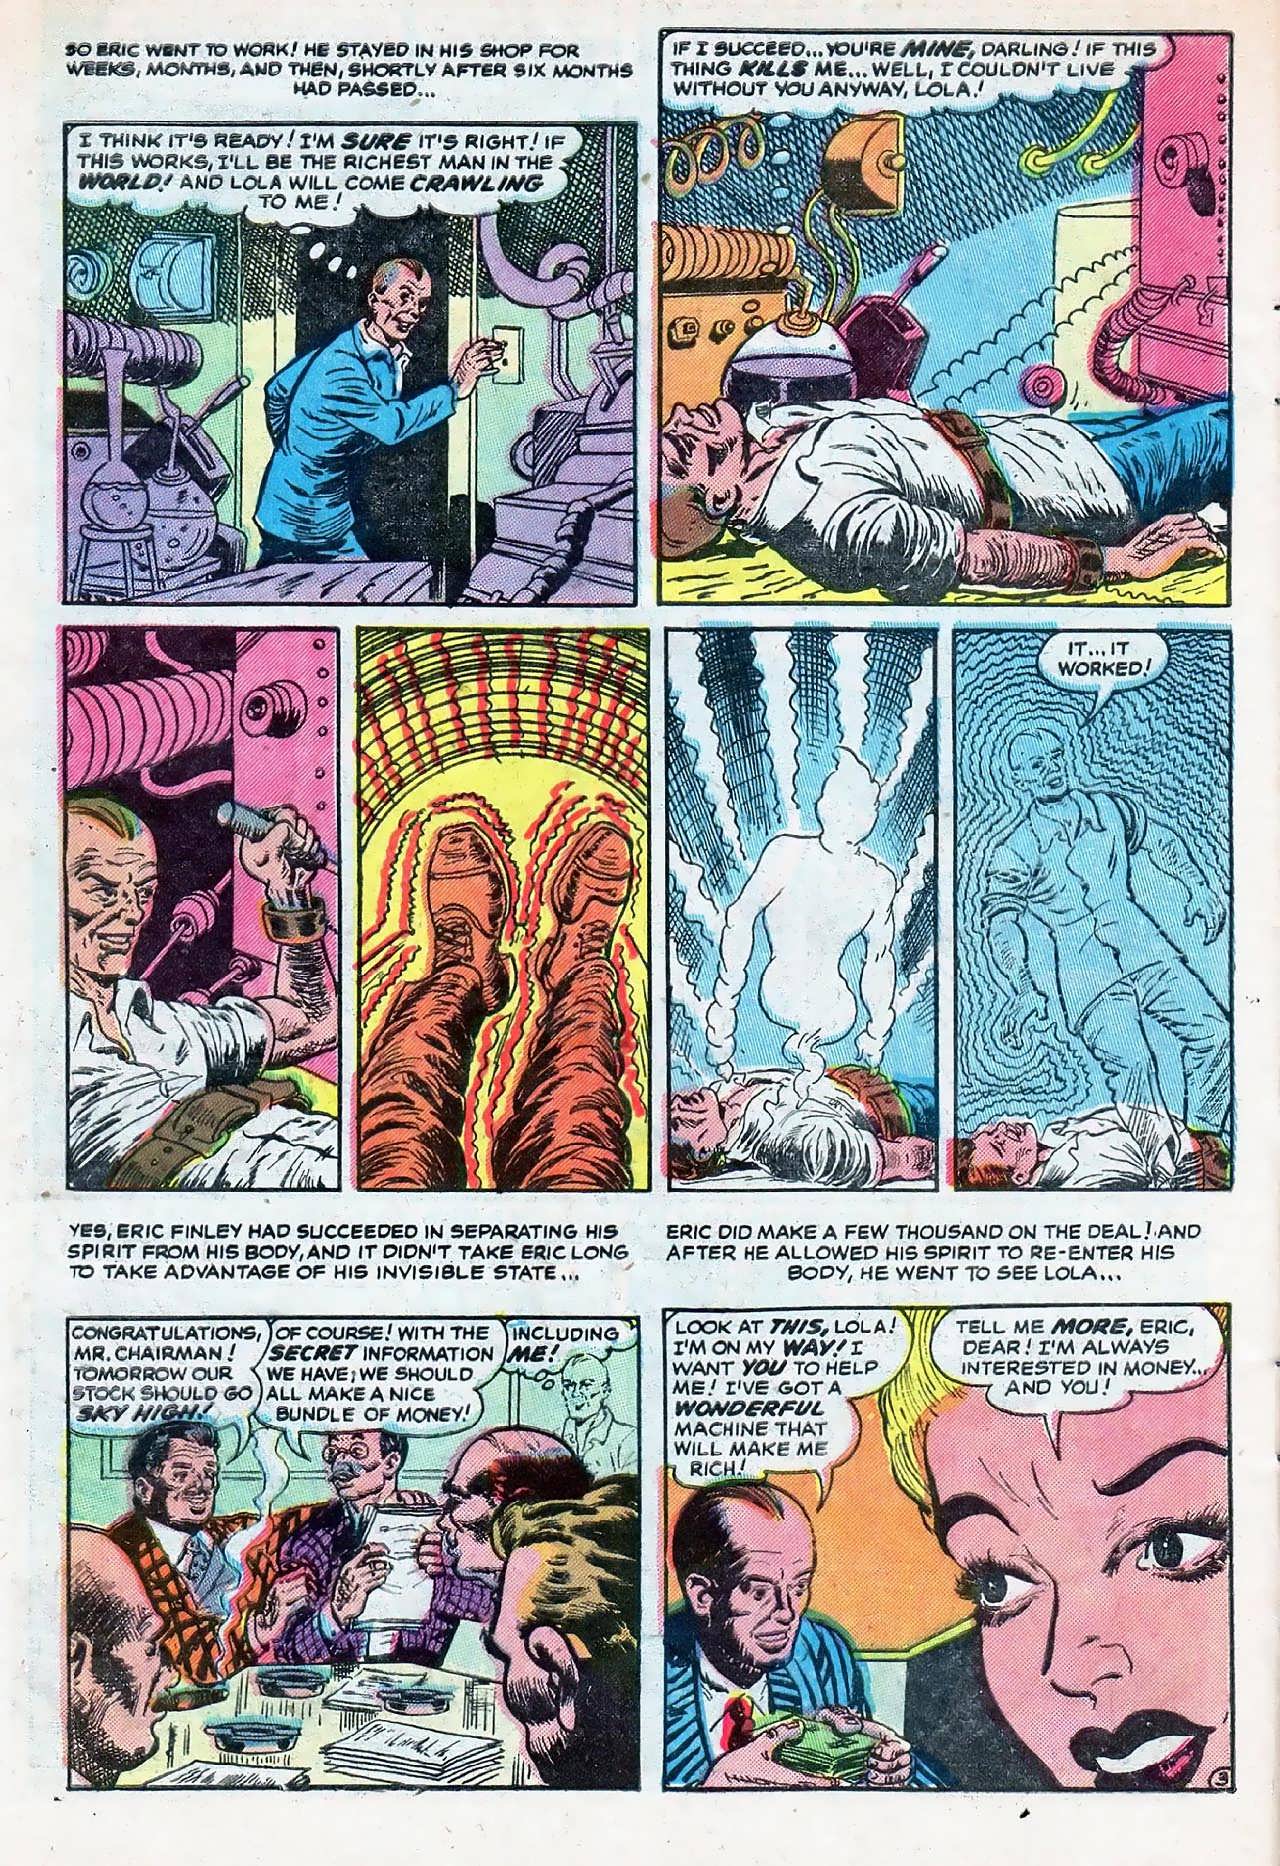 Marvel Tales (1949) 122 Page 29